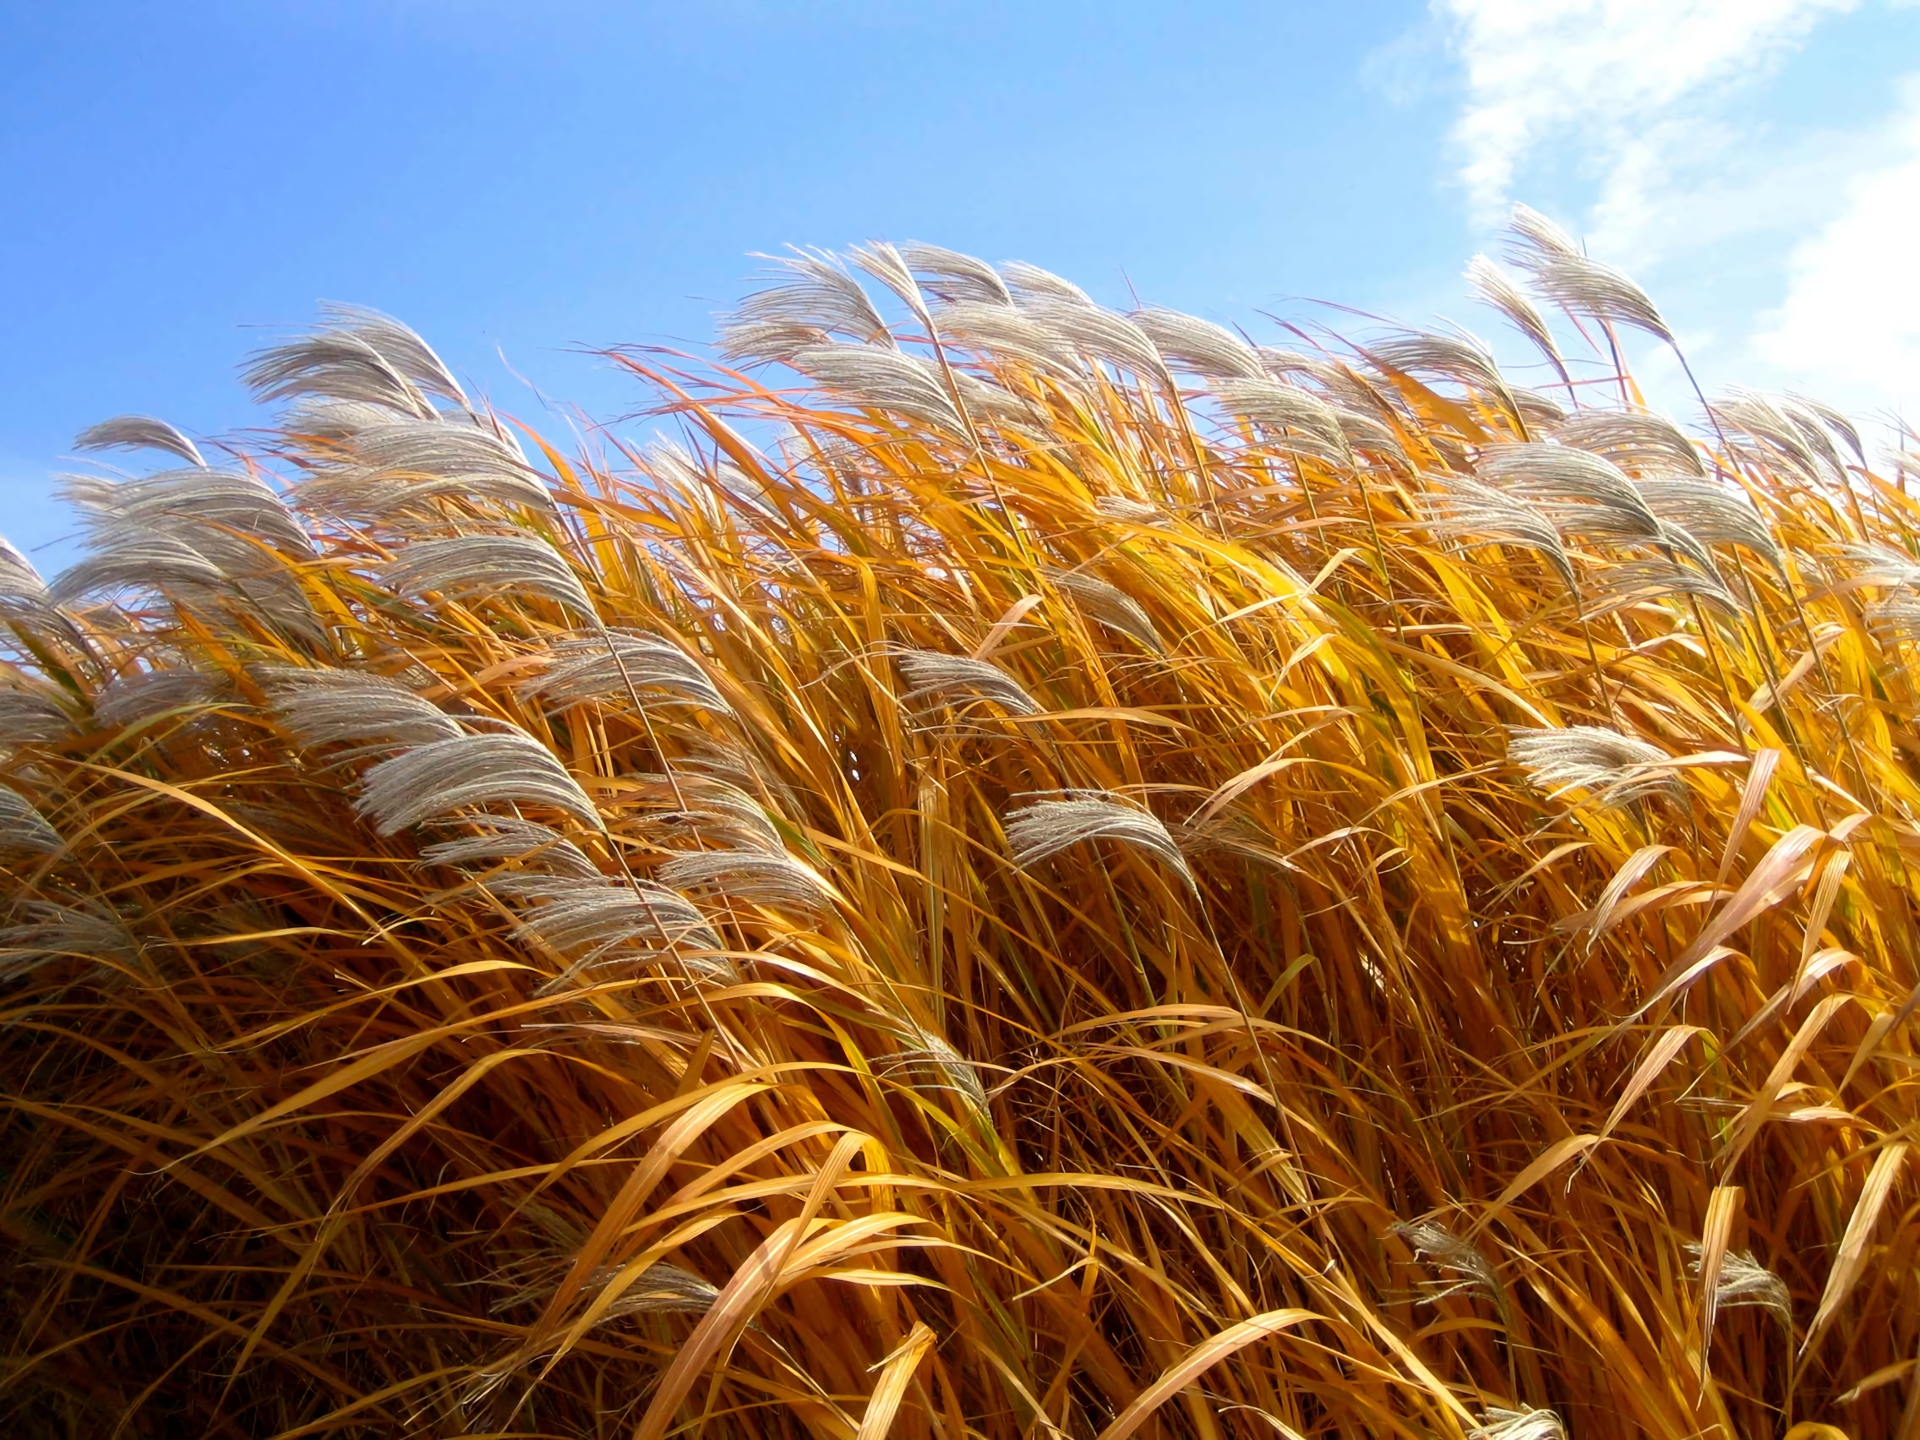 Earth Wheat HD Wallpaper | Background Image